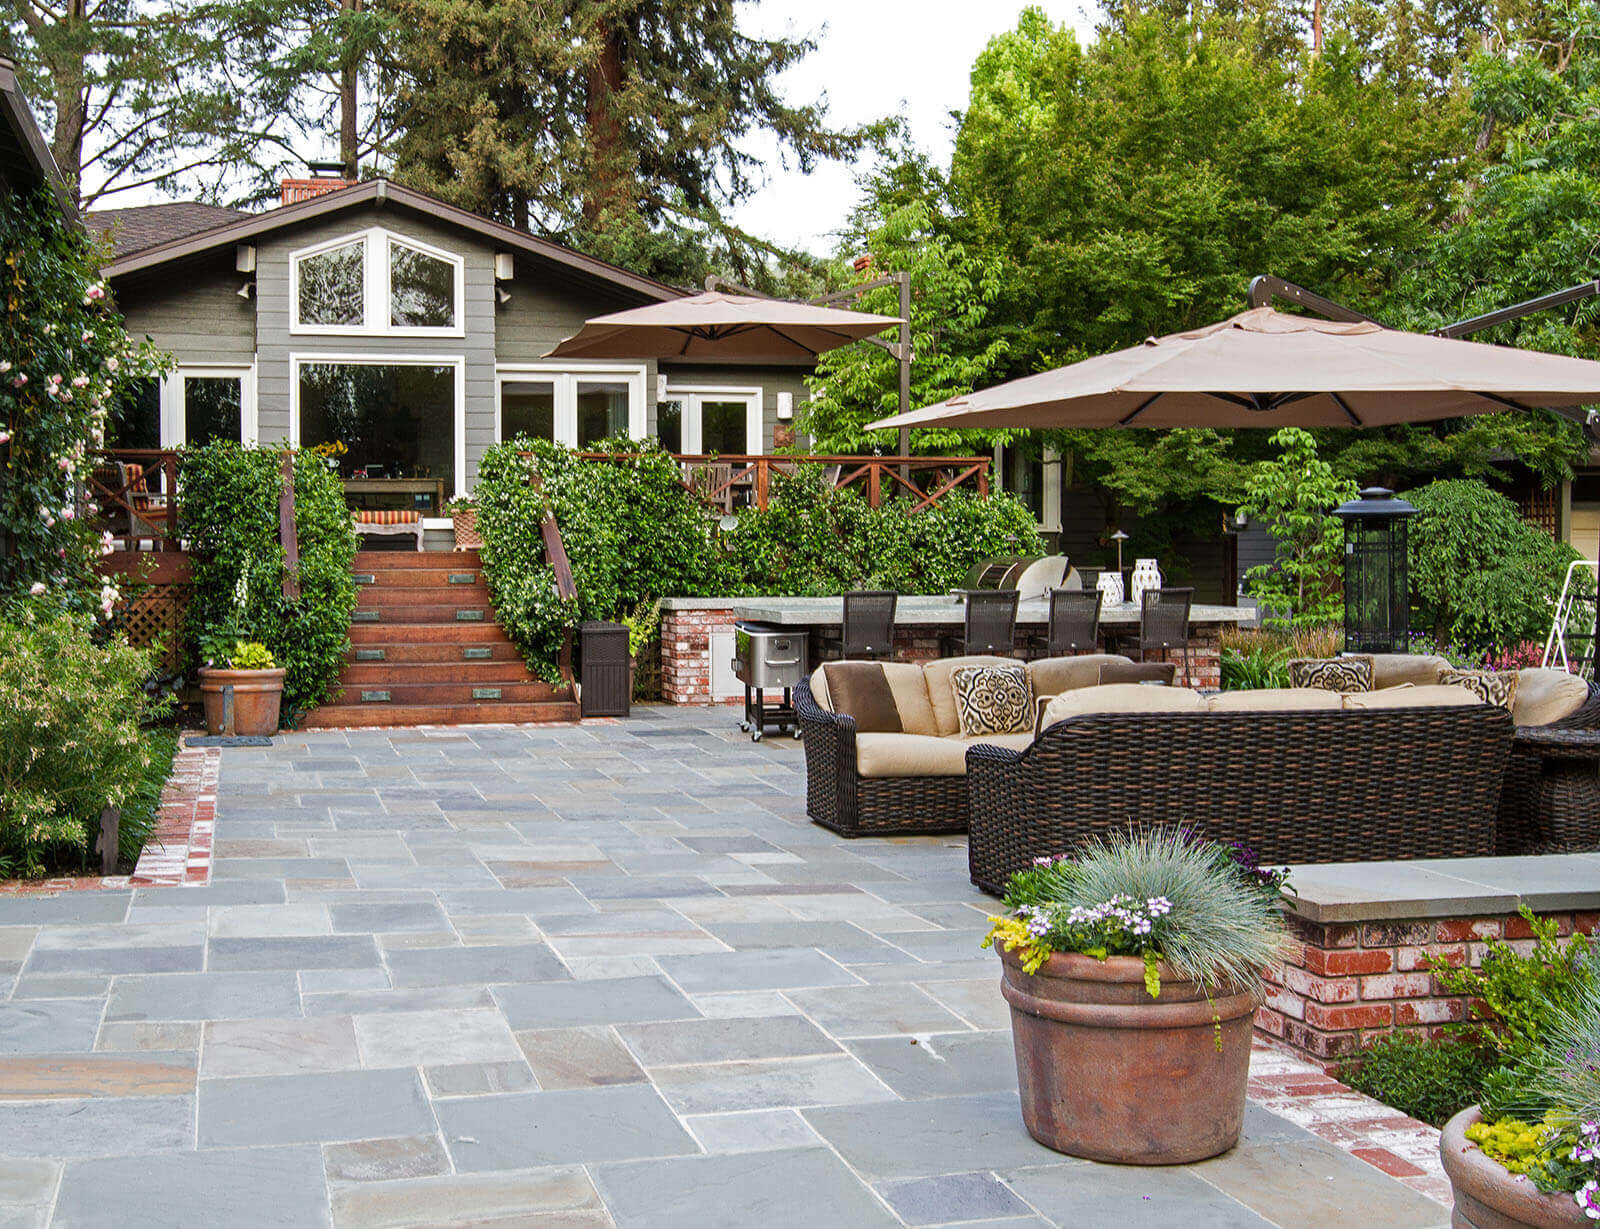 brick-lined slate tile open patio with stone topped bench seating area, rattan couch lounging area (with shaded umbrella) and stone table dining set with wrought iron chairs, further back are dark wood stairs with vine taken railings to an elevated back deck